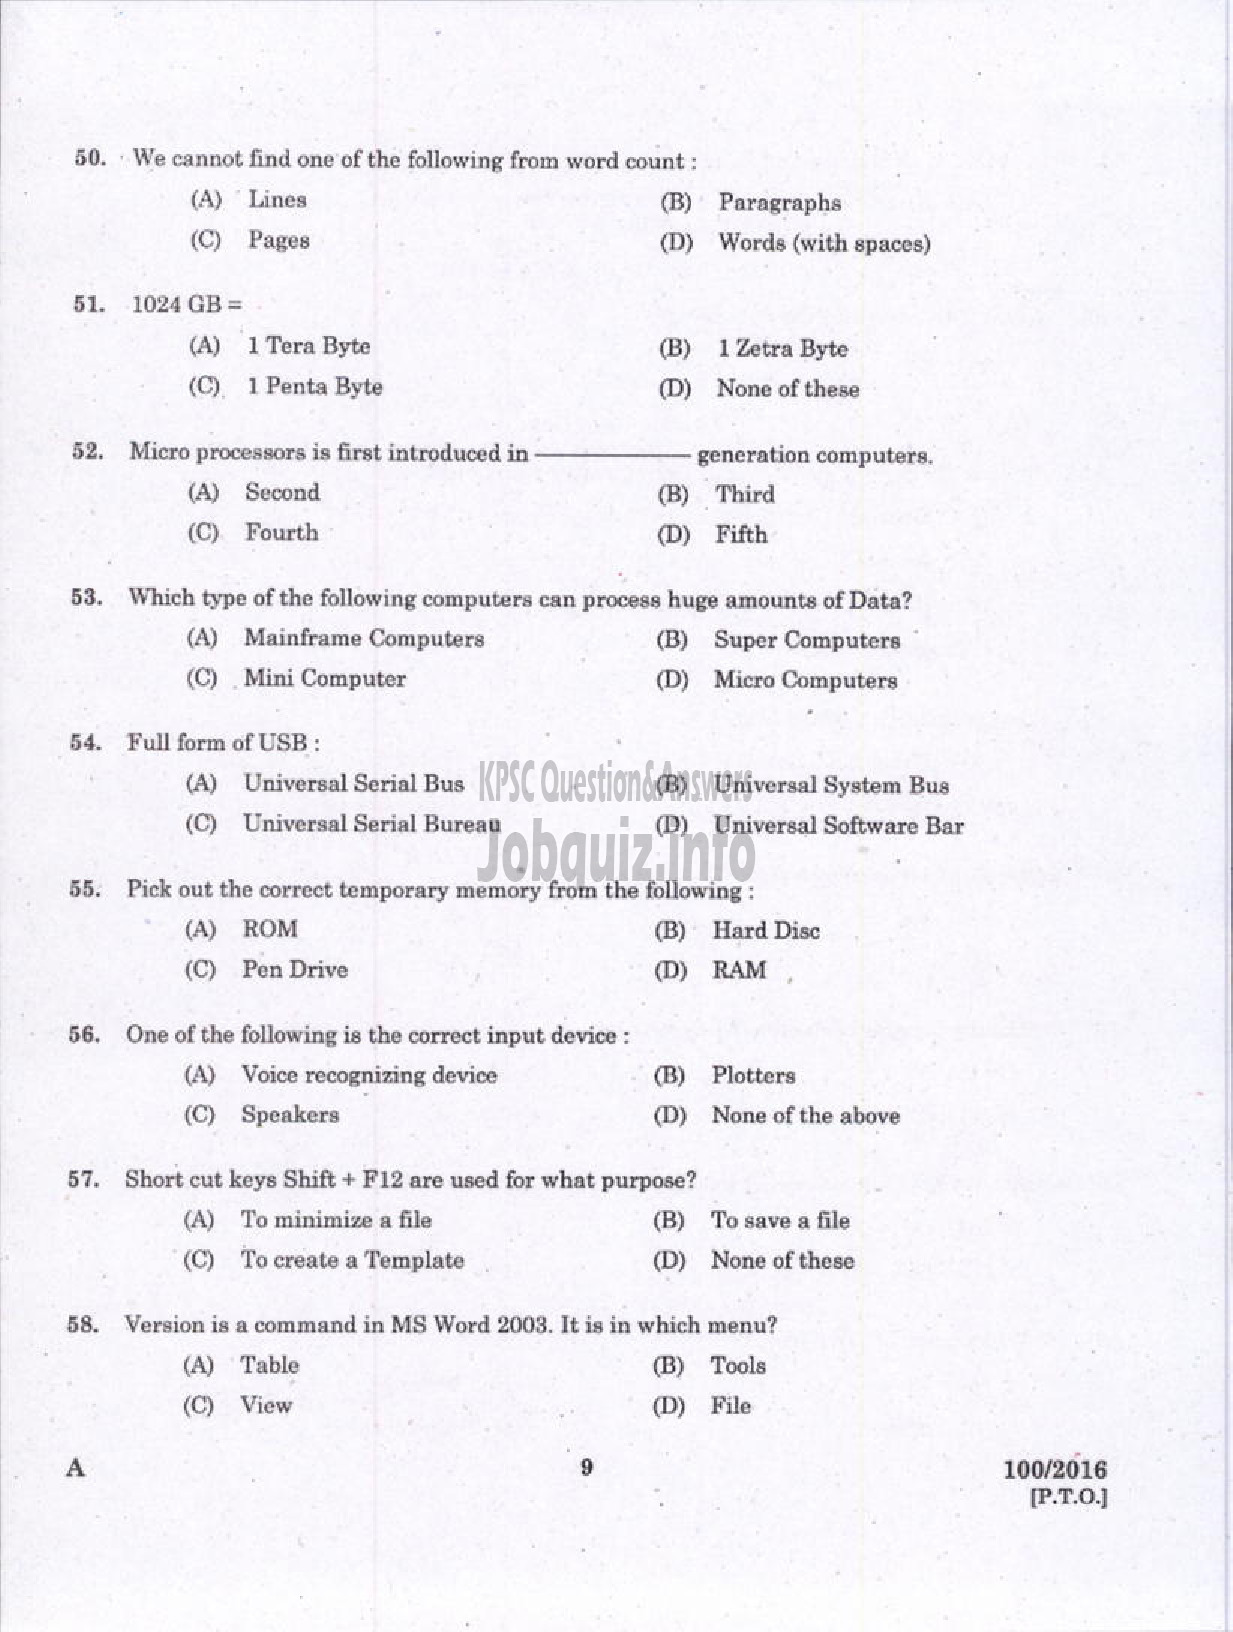 Kerala PSC Question Paper - DATA ENTRY OPERATOR DCB-7